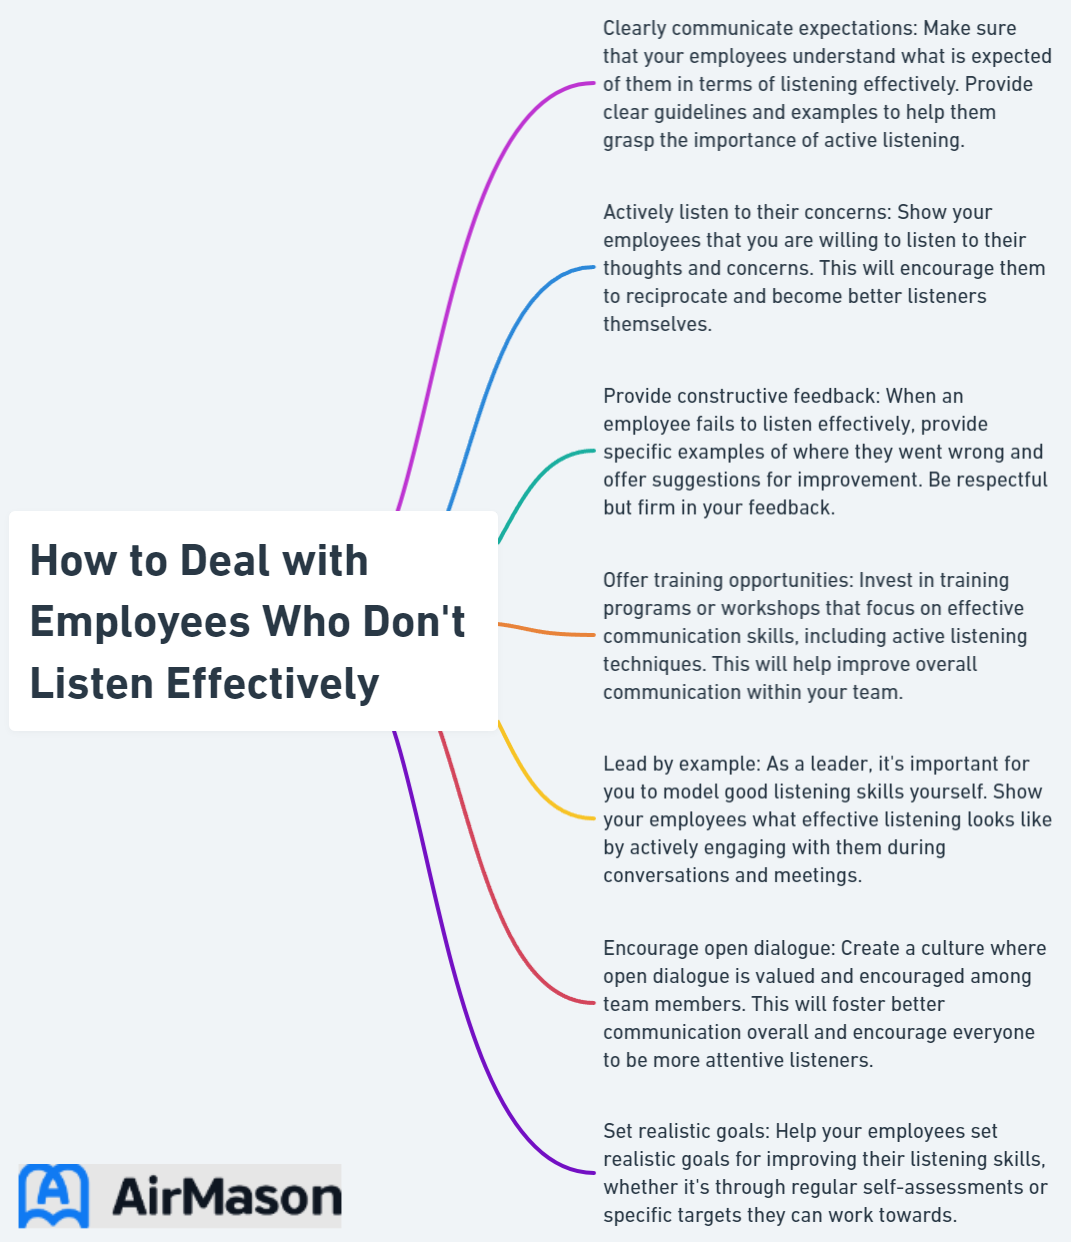 How to Deal with Employees Who Don't Listen Effectively